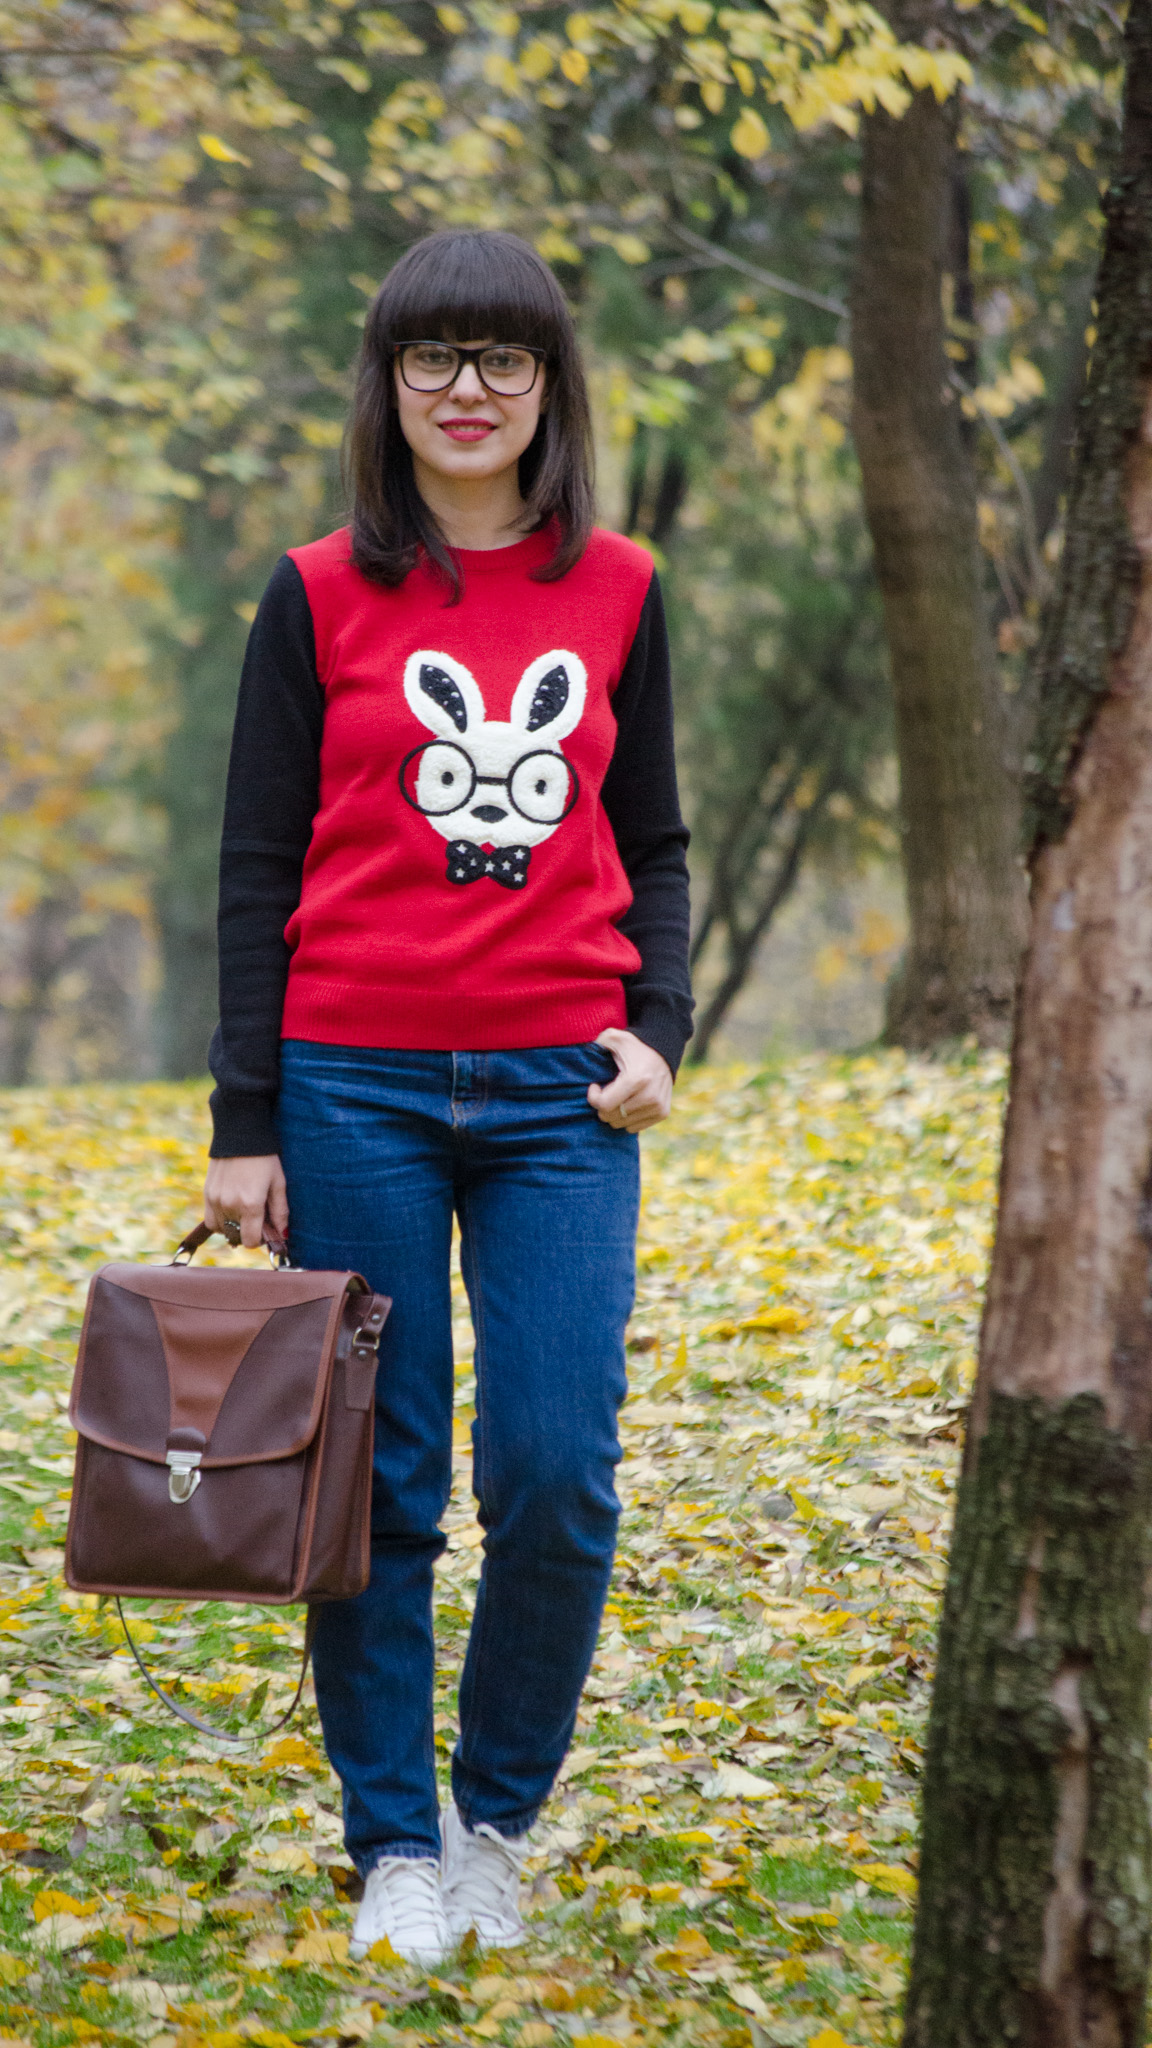 geek style outfit - wabbit season cobalt blue coat geek rabbit sweater koton mom jeans pull&bear thrifted bag satchel brown white converse sneakers glasses bangs autumn fall school outfit dorky